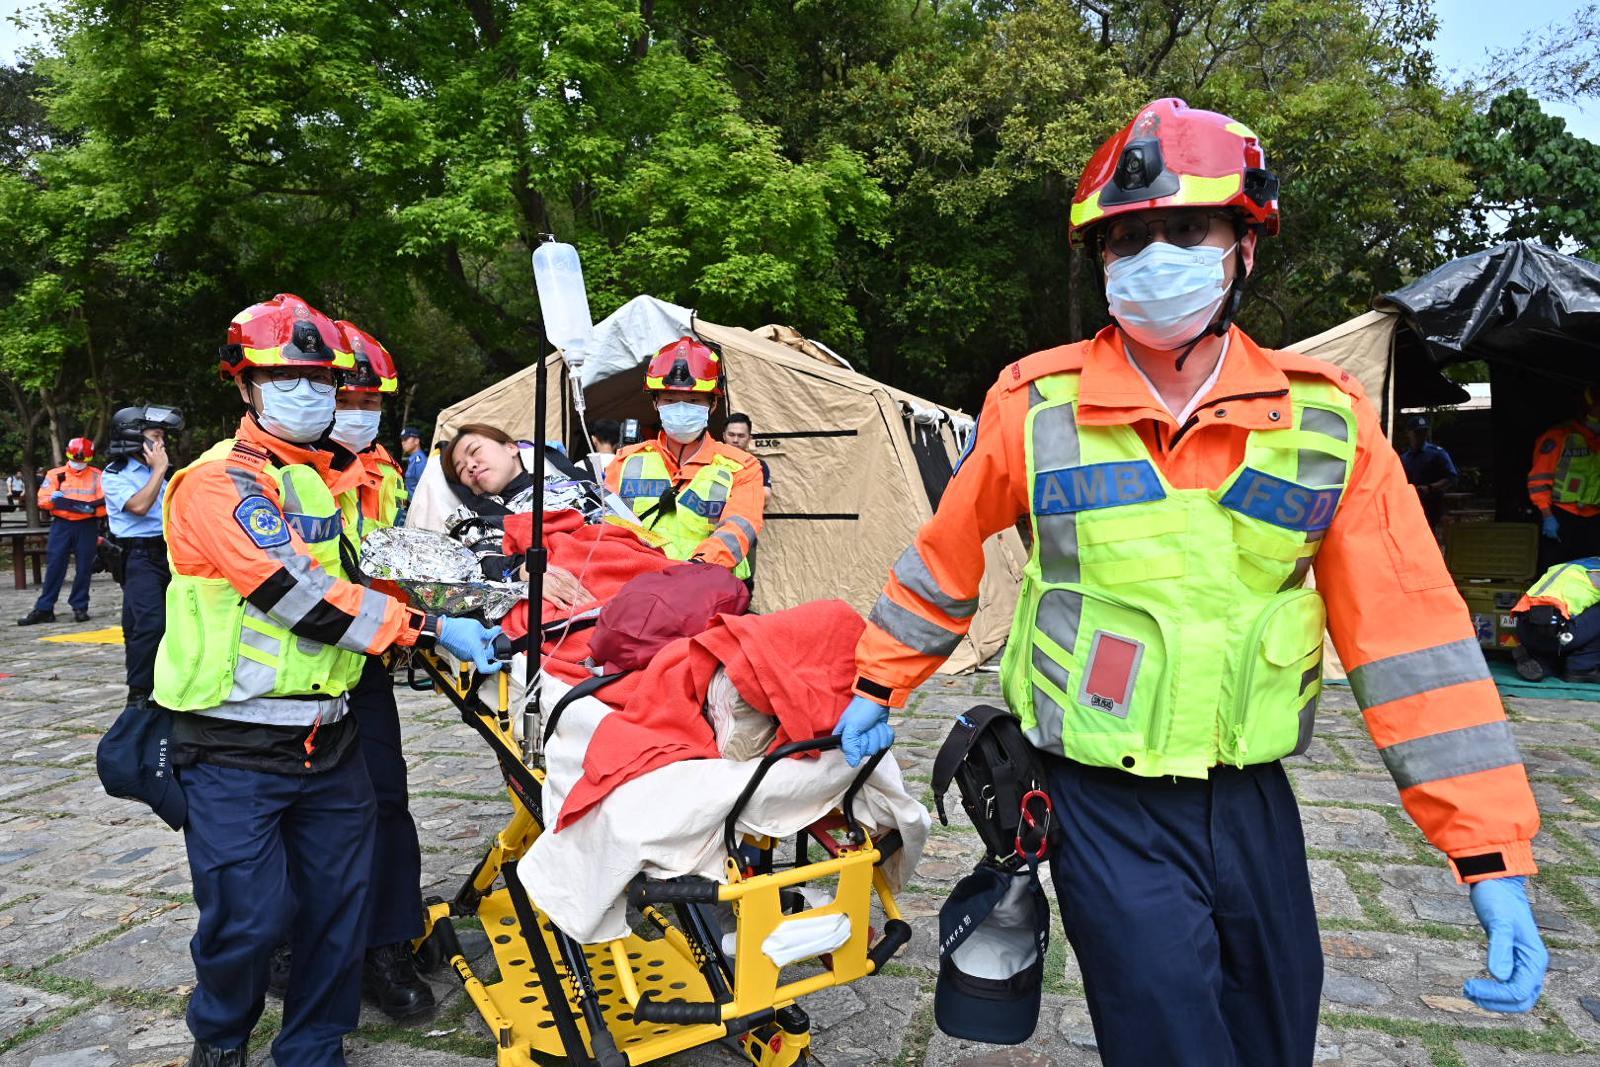 Police Hong Kong Island Regional Headquarters conducted an inter-departmental major incident exercise codenamed "COLDMIST" with the Fire Services Department, Government Flying Service, Civil Aid Service, Home Affairs Department, Agriculture, Fisheries and Conservation Department and Water Supplies Department at Aberdeen Country Park this afternoon (March 27). Picture shows officers taking the injured to hospitals.